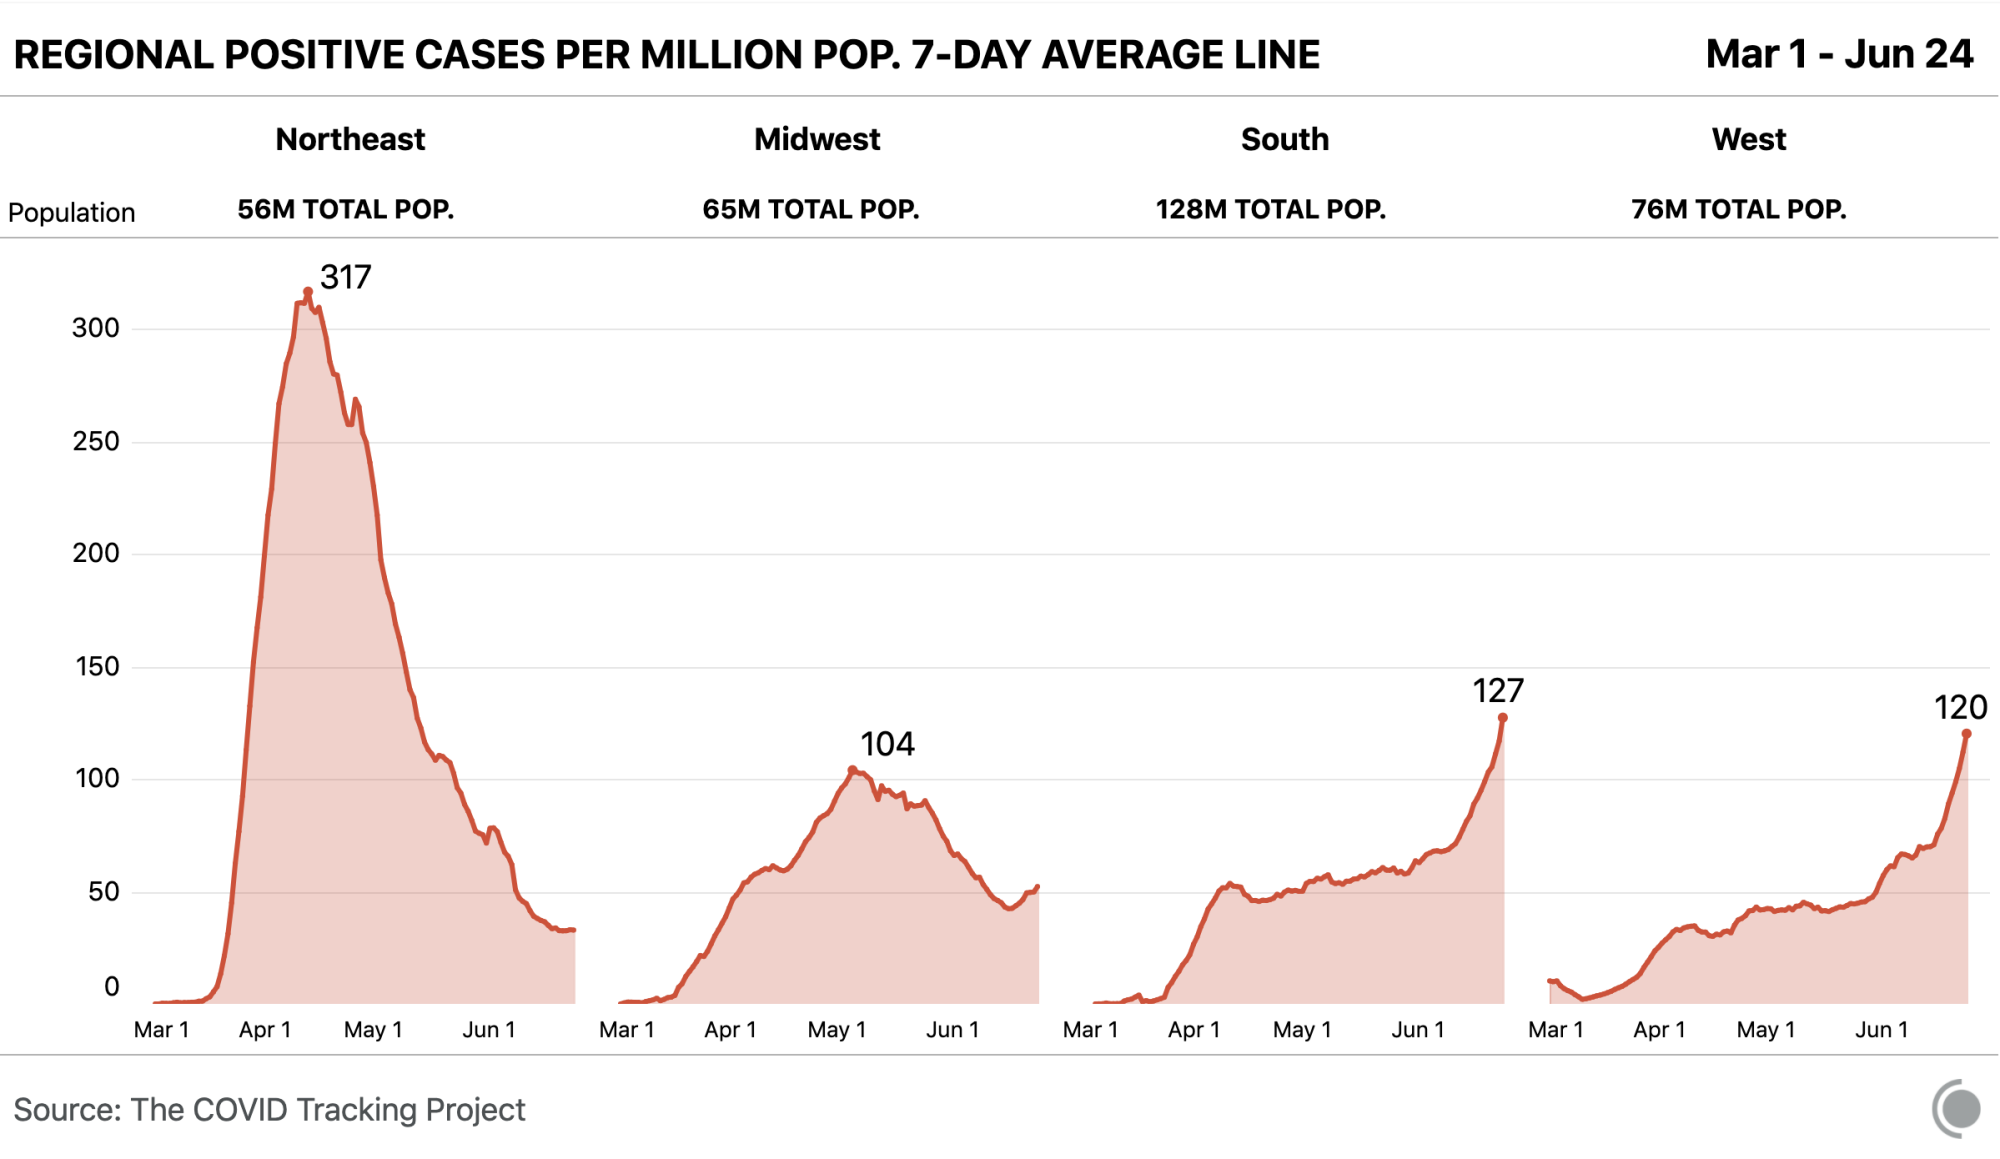 Chart showing new cases per million falling sharply in the Northeast (56M total pop.), beginning to rise in the Midwest (65M total pop.), and rising sharply in the South (128M total pop.) and West (76M total pop.)